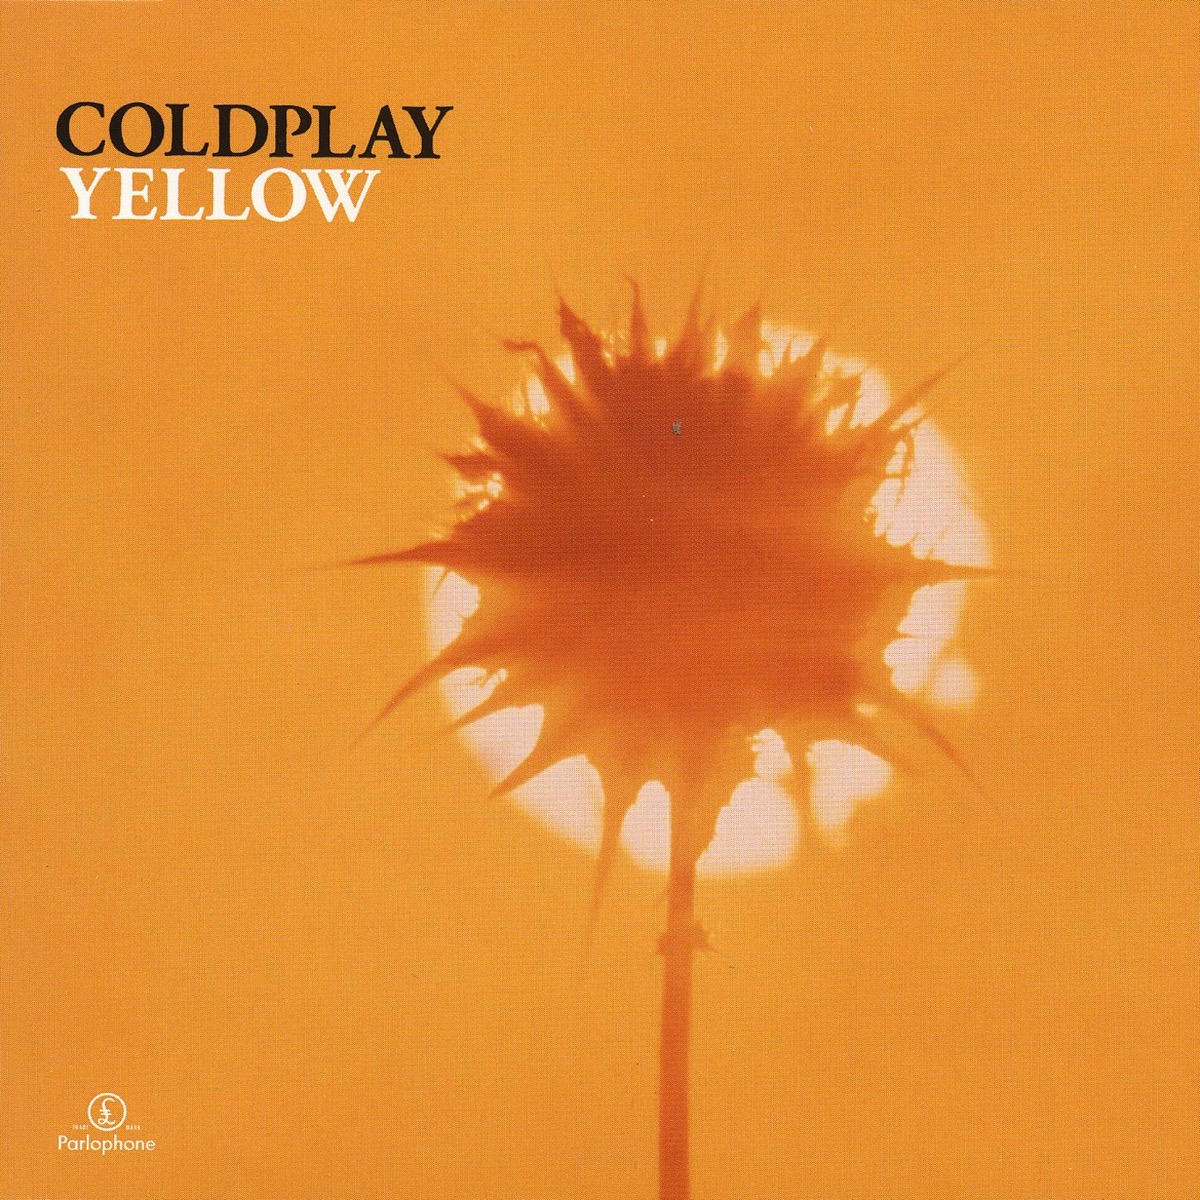 Single cover art for "Yellow" by Coldplay